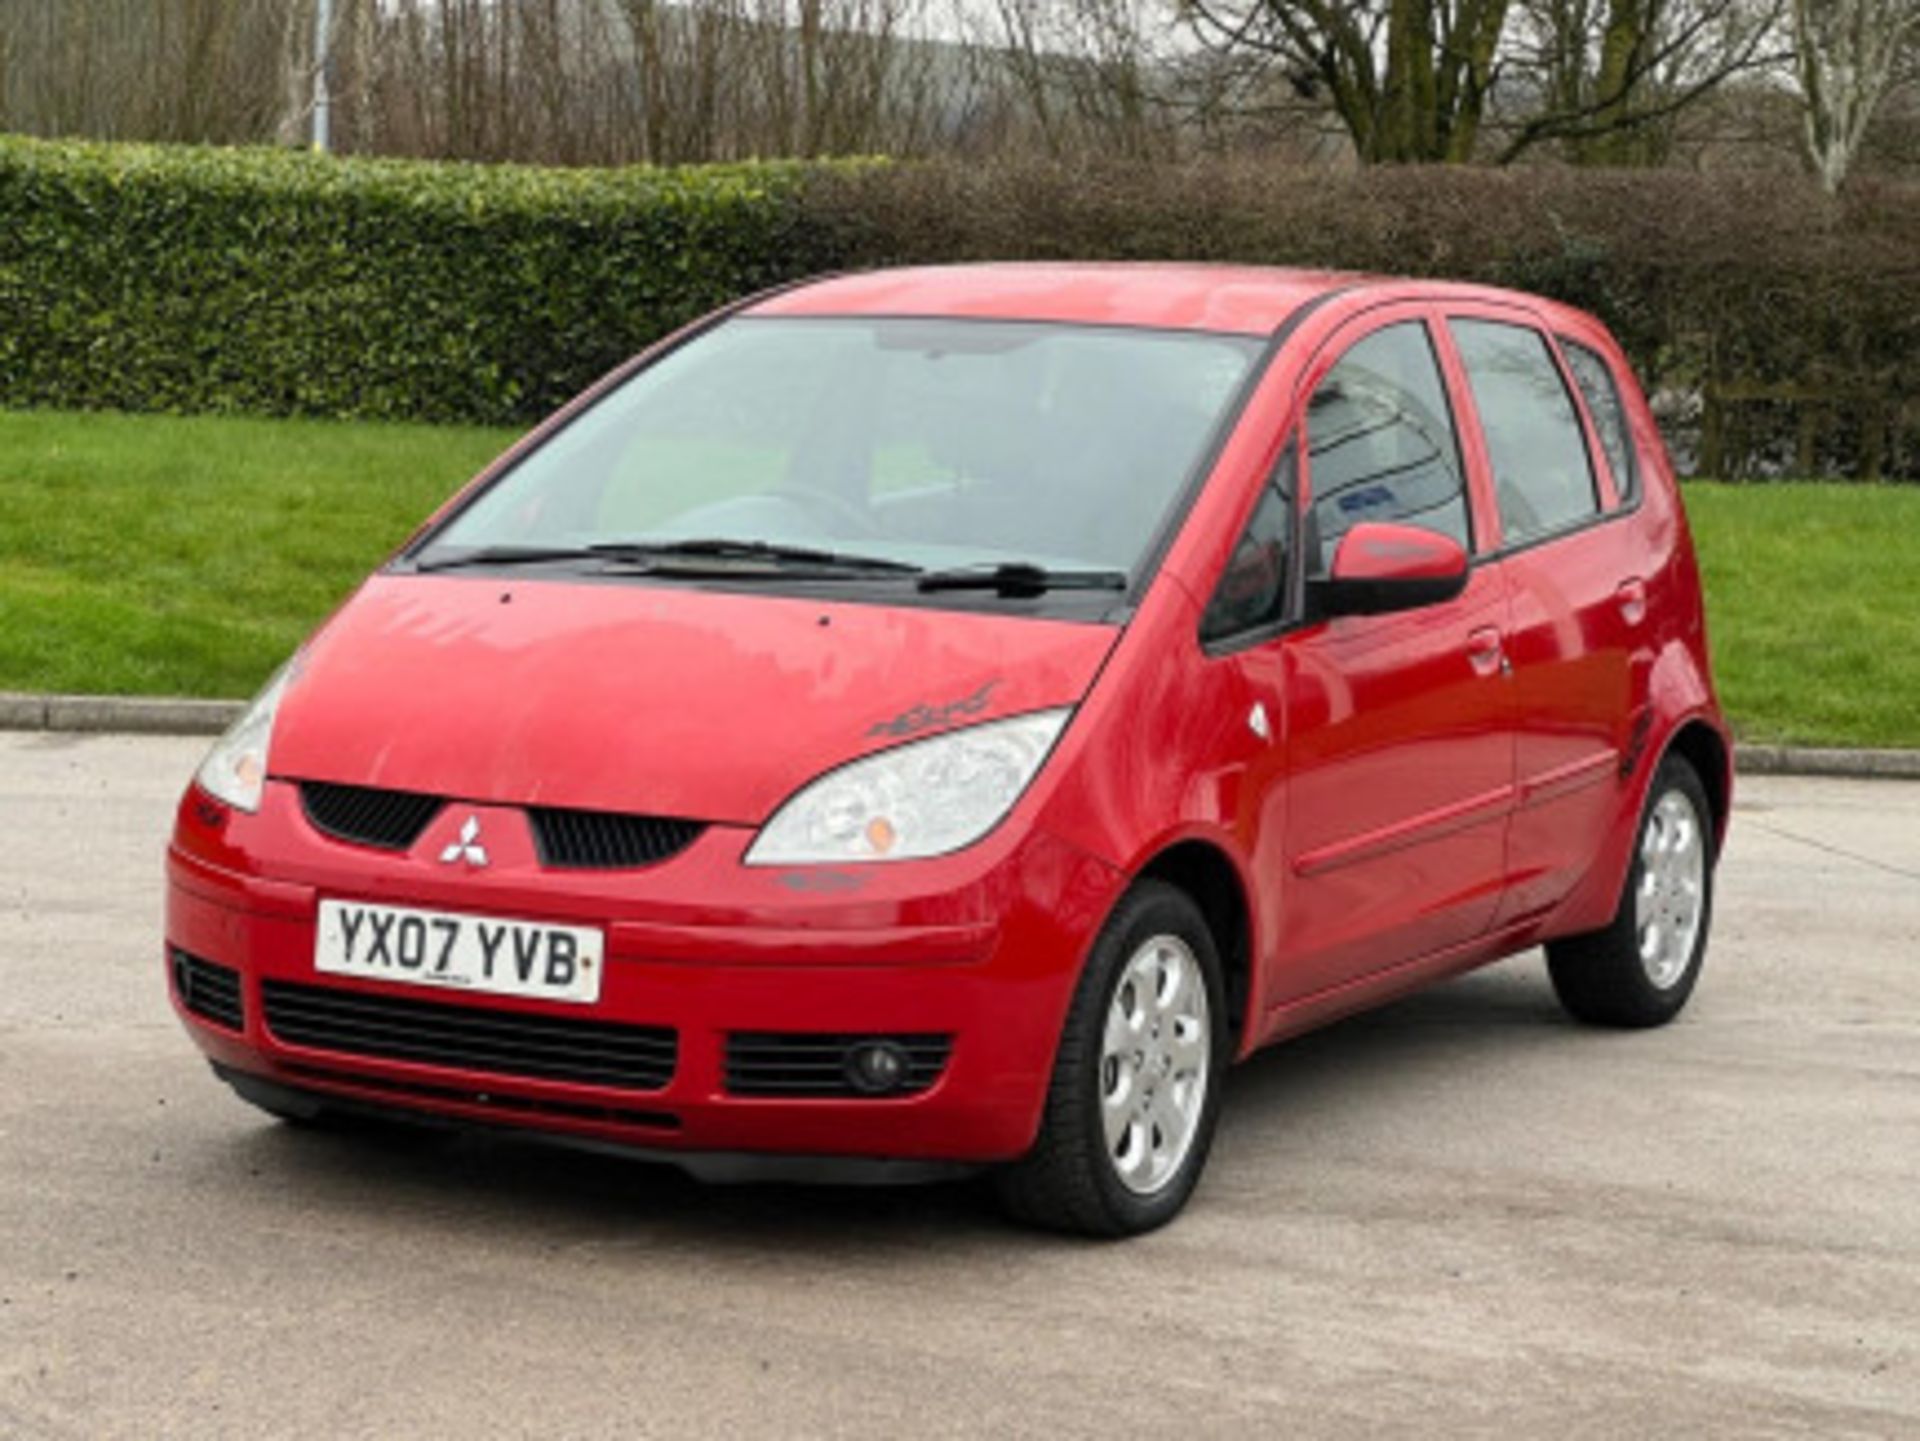 2007 MITSUBISHI COLT 1.5 DI-D DIESEL AUTOMATIC >>--NO VAT ON HAMMER--<< - Image 84 of 191